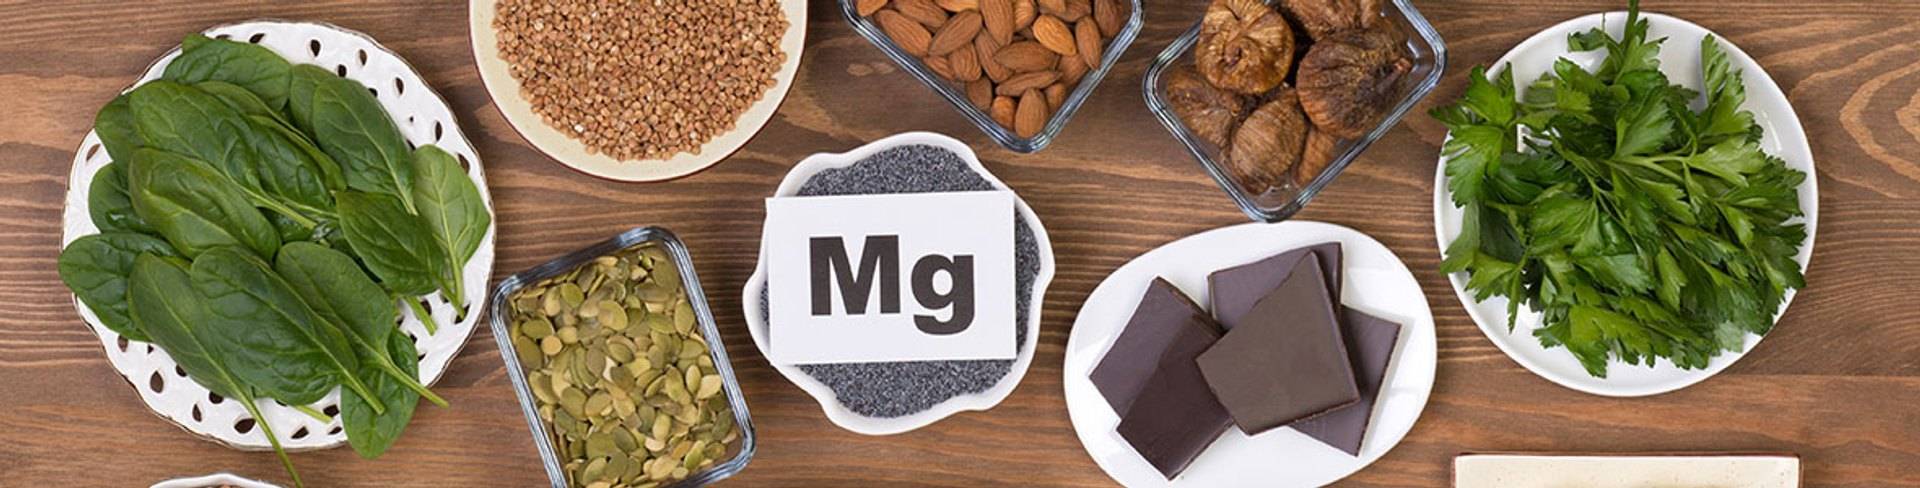 Why magnesium is so important for your health and well-being